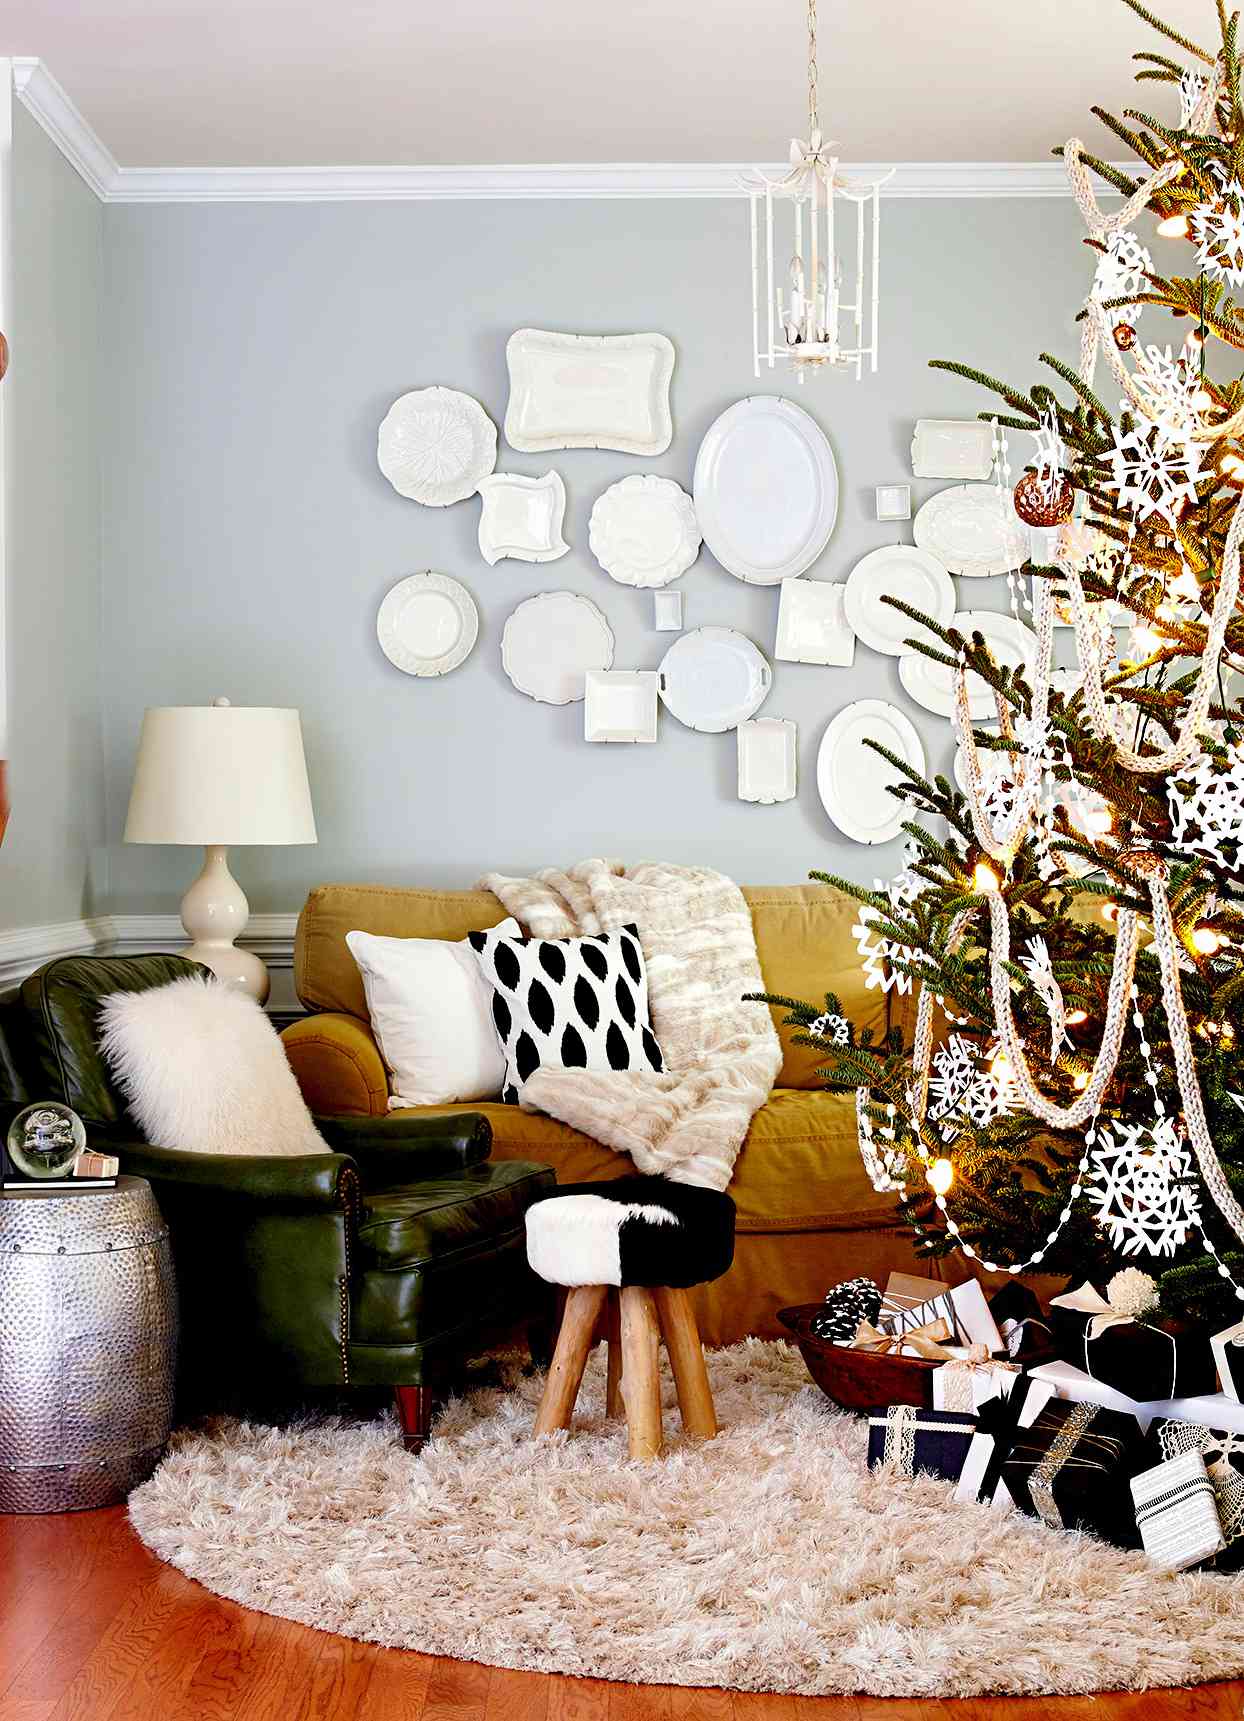 Choose Decorations That are Warm and Bright